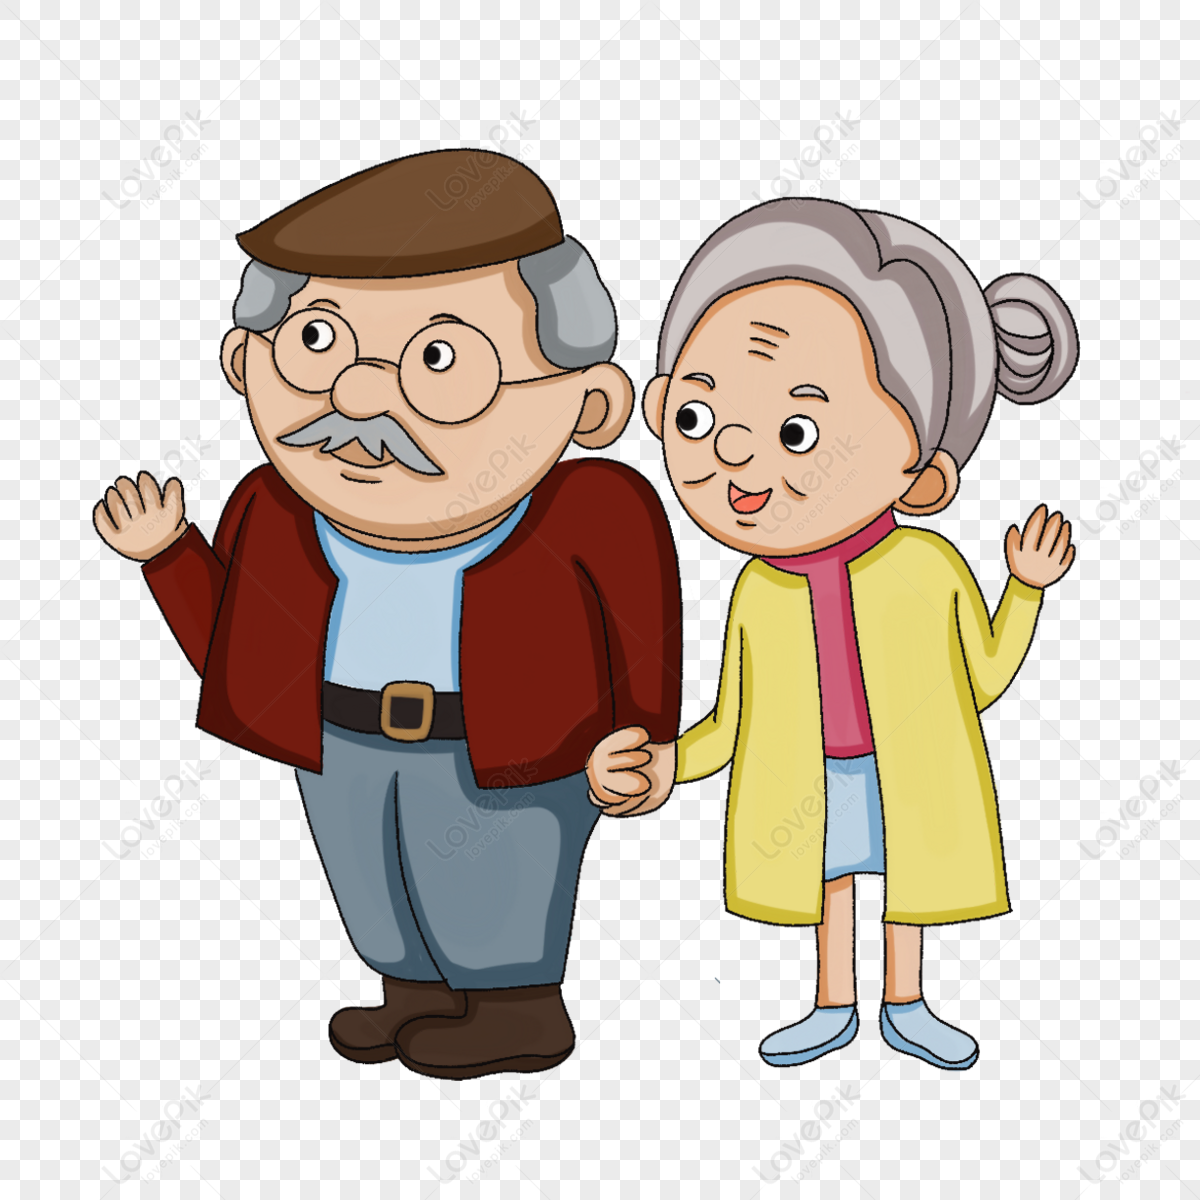 Old person is walking png graphic clipart design 23371234 PNG